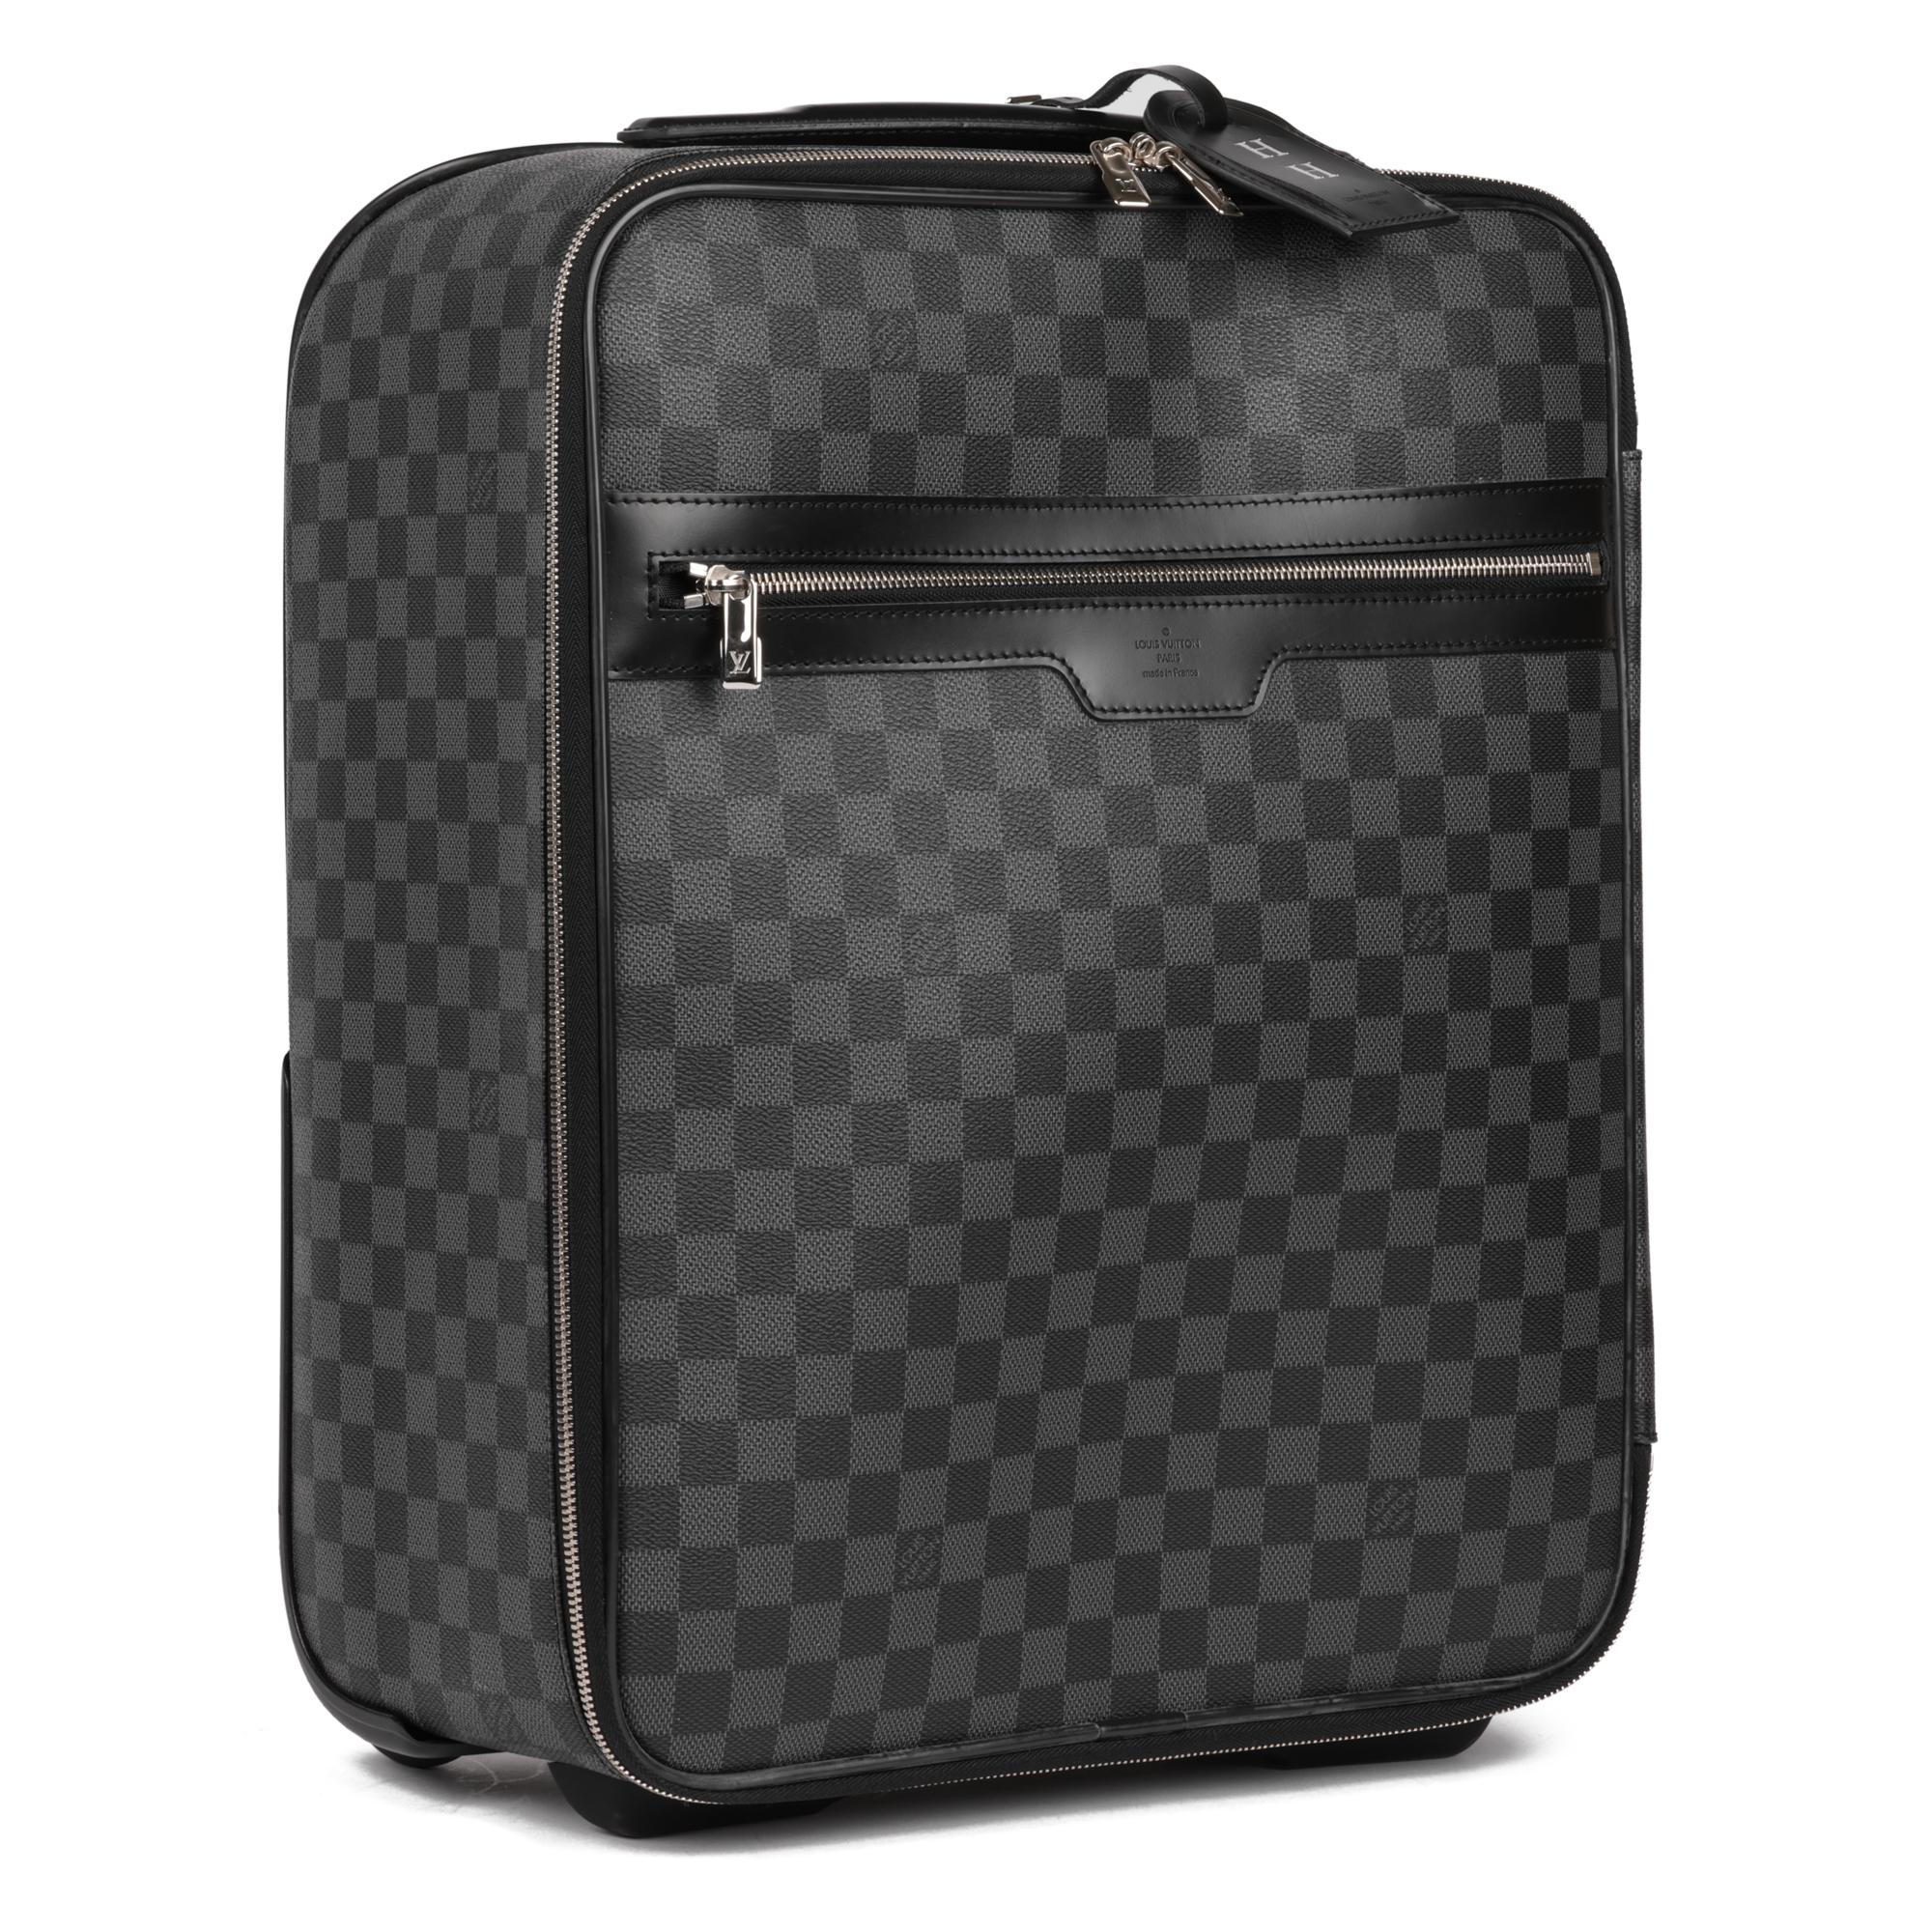 LOUIS VUITTON
Damier Ebene Coated Canvas & Black Calfskin Leather Pegase 45 

Xupes Reference: CB835
Serial Number: SP3143
Age (Circa): 2013
Accompanied By: Louis Vuitton Dust Bag, Padlock, Keys, Care Booklet, Personalised Luggage Tag
Authenticity